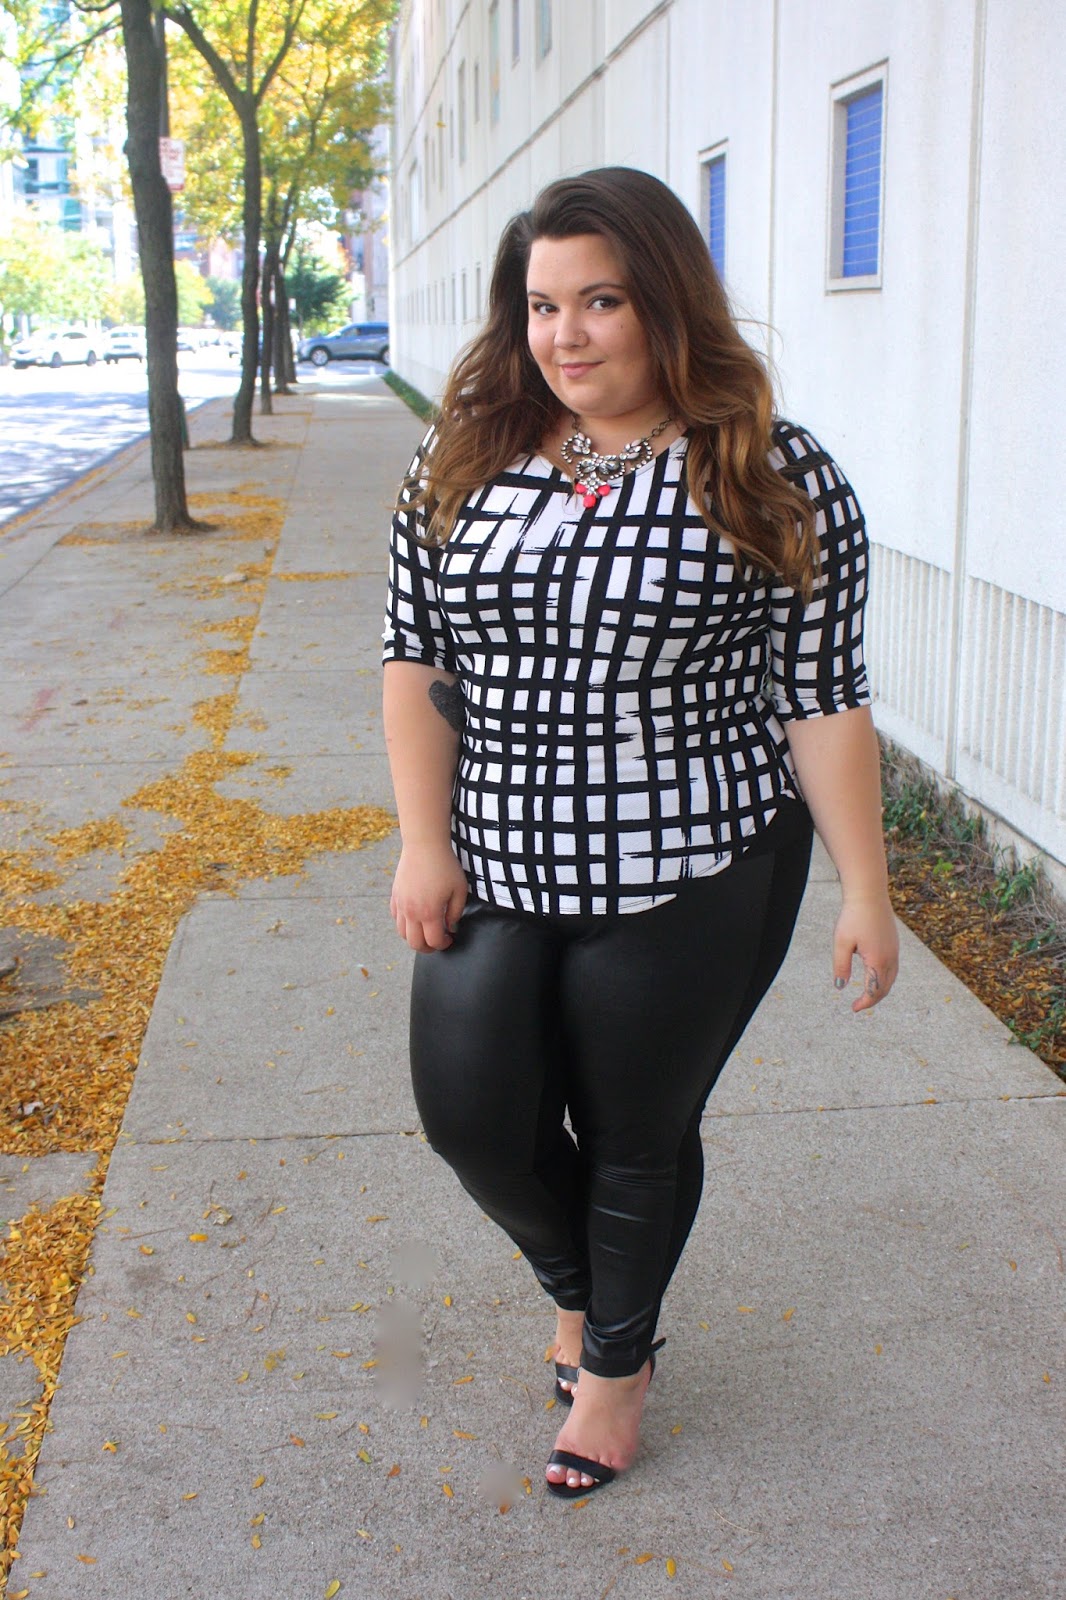 natalie craig, natalie in the city, fashion blogger, chicago, plus size fashion blogger, leather leggings, ootd, fatshion, business casual, brush strokes, what to wear with statement jewelry, plus size leather leggings, leggings, fall fashion